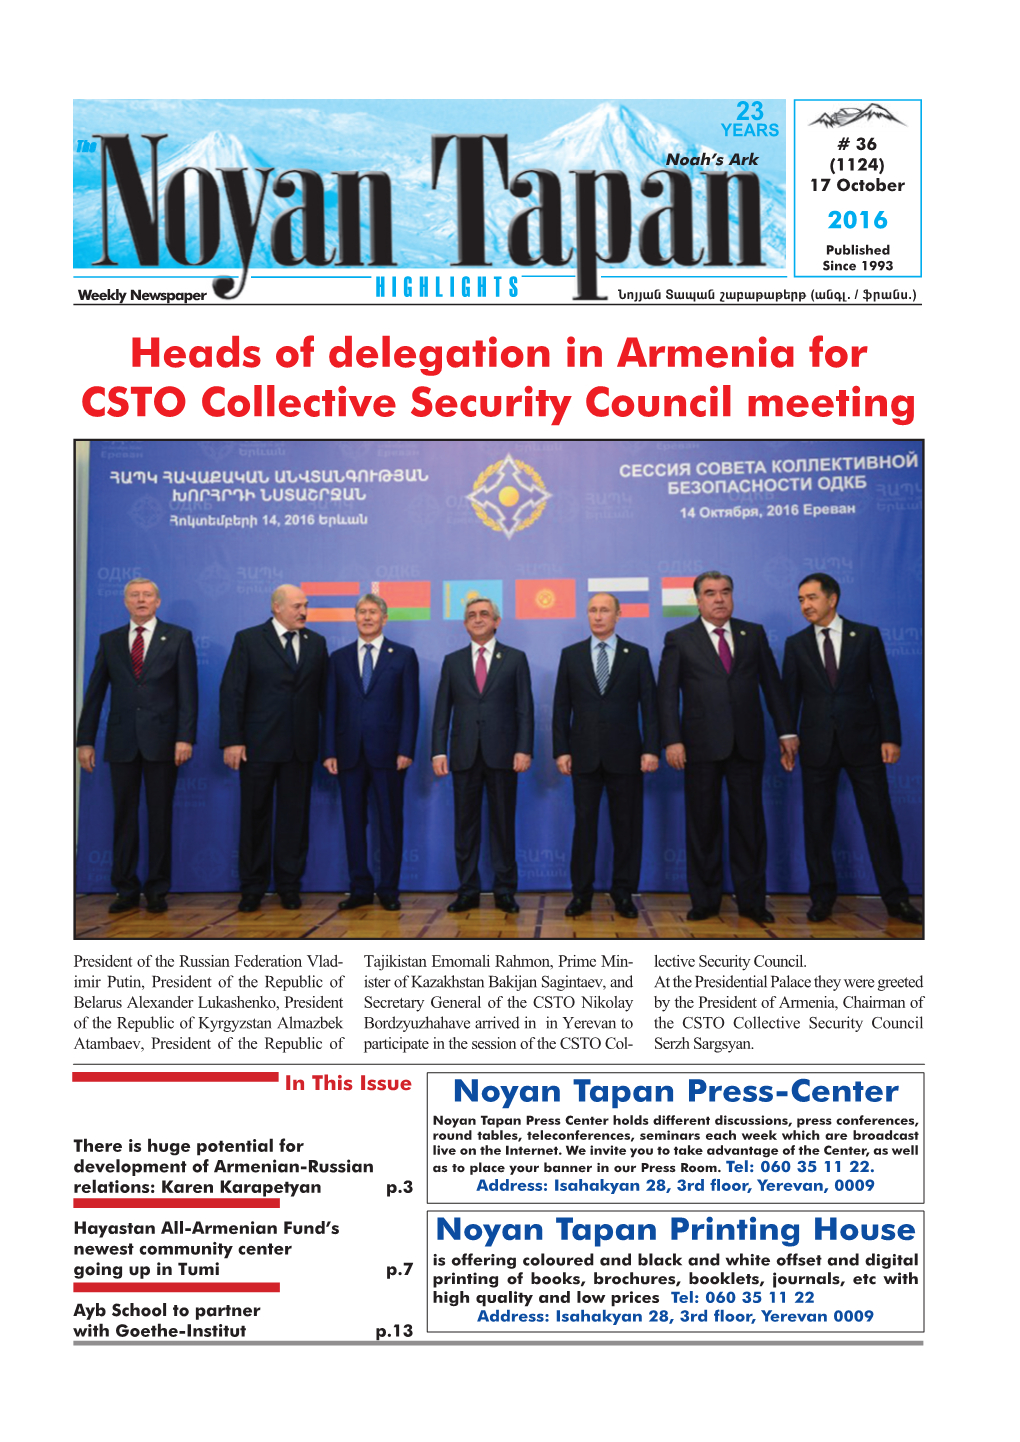 Heads of Delegation in Armenia for CSTO Collective Security Council